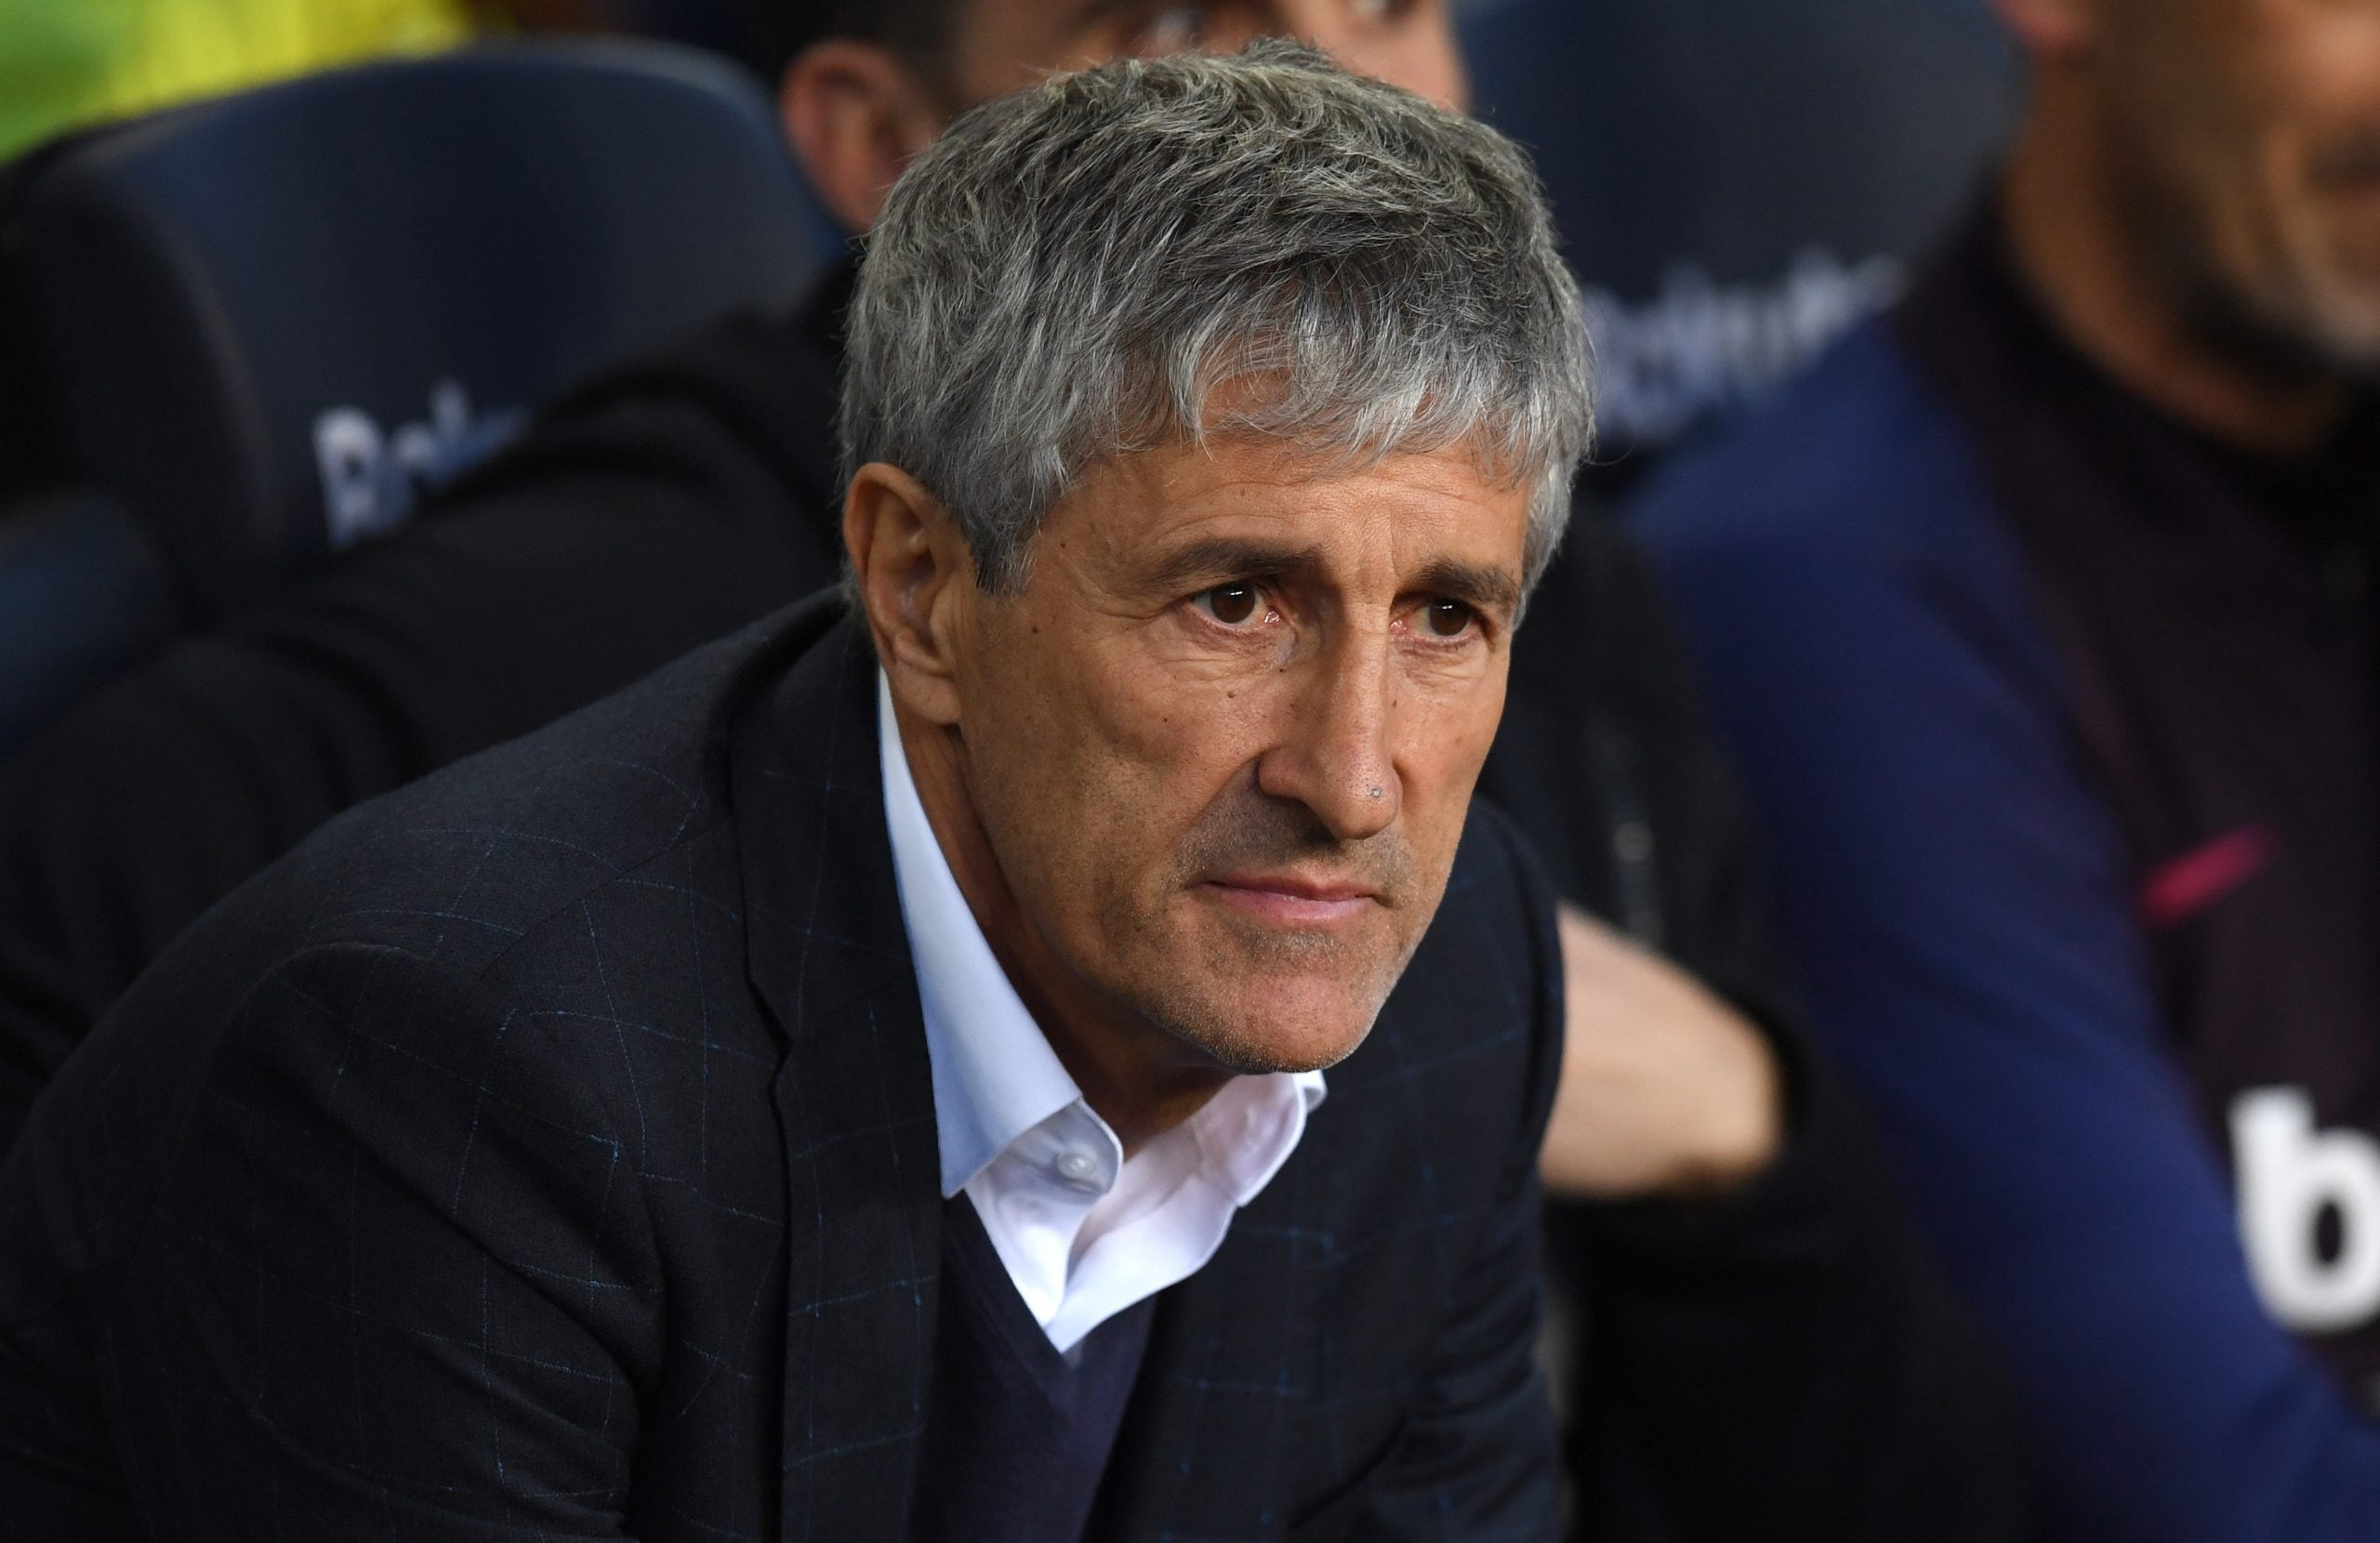 BARCELONA, SPAIN - MARCH 07: Quique Setien, Manager of Barcelona looks on during the La Liga match between FC Barcelona and Real Sociedad at Camp Nou on March 07, 2020 in Barcelona, Spain. (Photo by Alex Caparros/Getty Images)